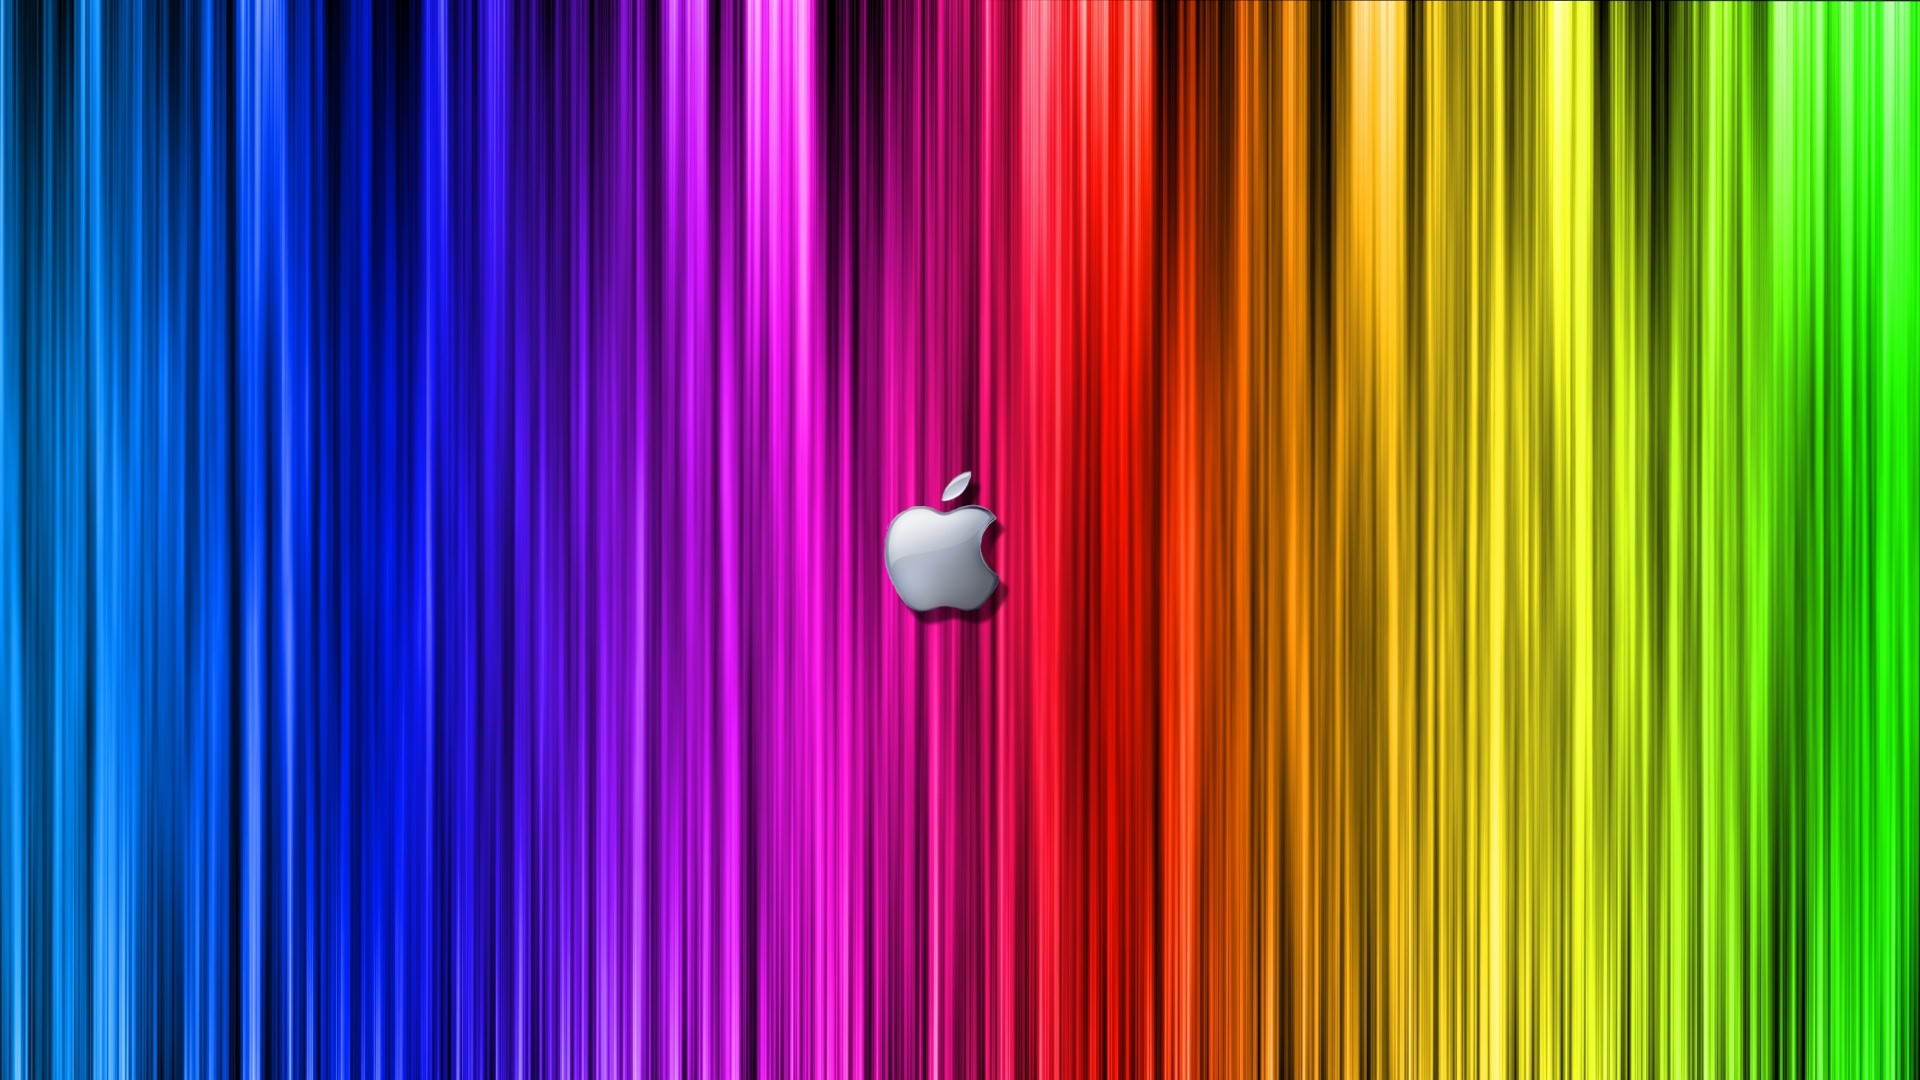 Rainbow Background Wallpaper HD With Resolution 1920X1080 pixel. You can make this wallpaper for your Desktop Computer Backgrounds, Mac Wallpapers, Android Lock screen or iPhone Screensavers